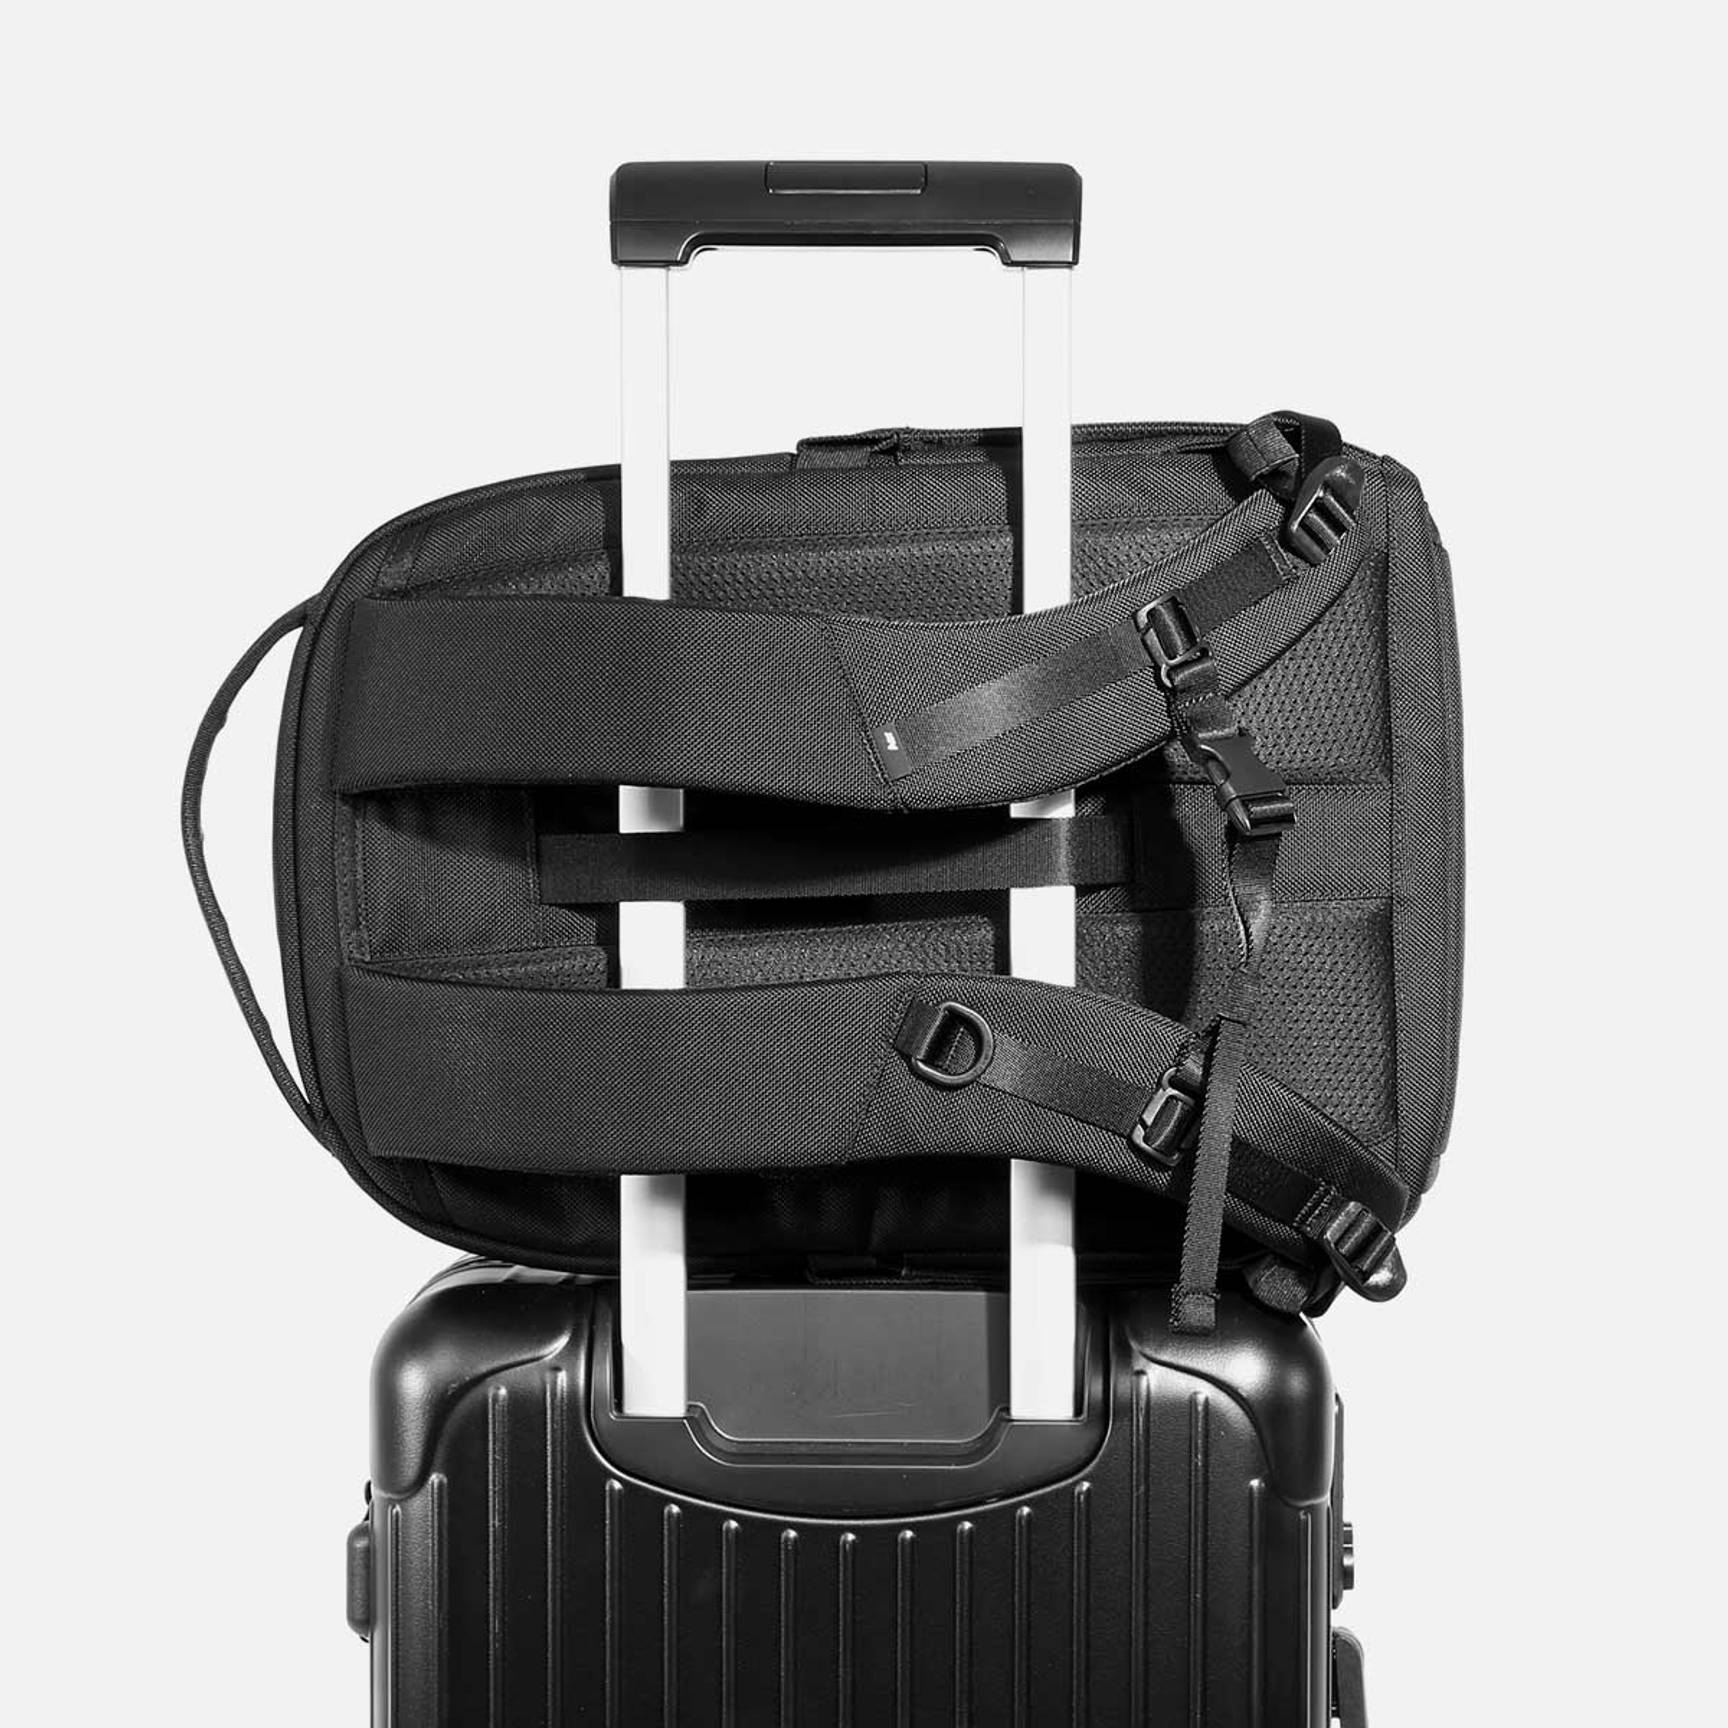 https://cld.accentuate.io/39444980236384/1646197237903/AER11012_fitpack3_black_luggage.jpg?v=0&options=w_1728